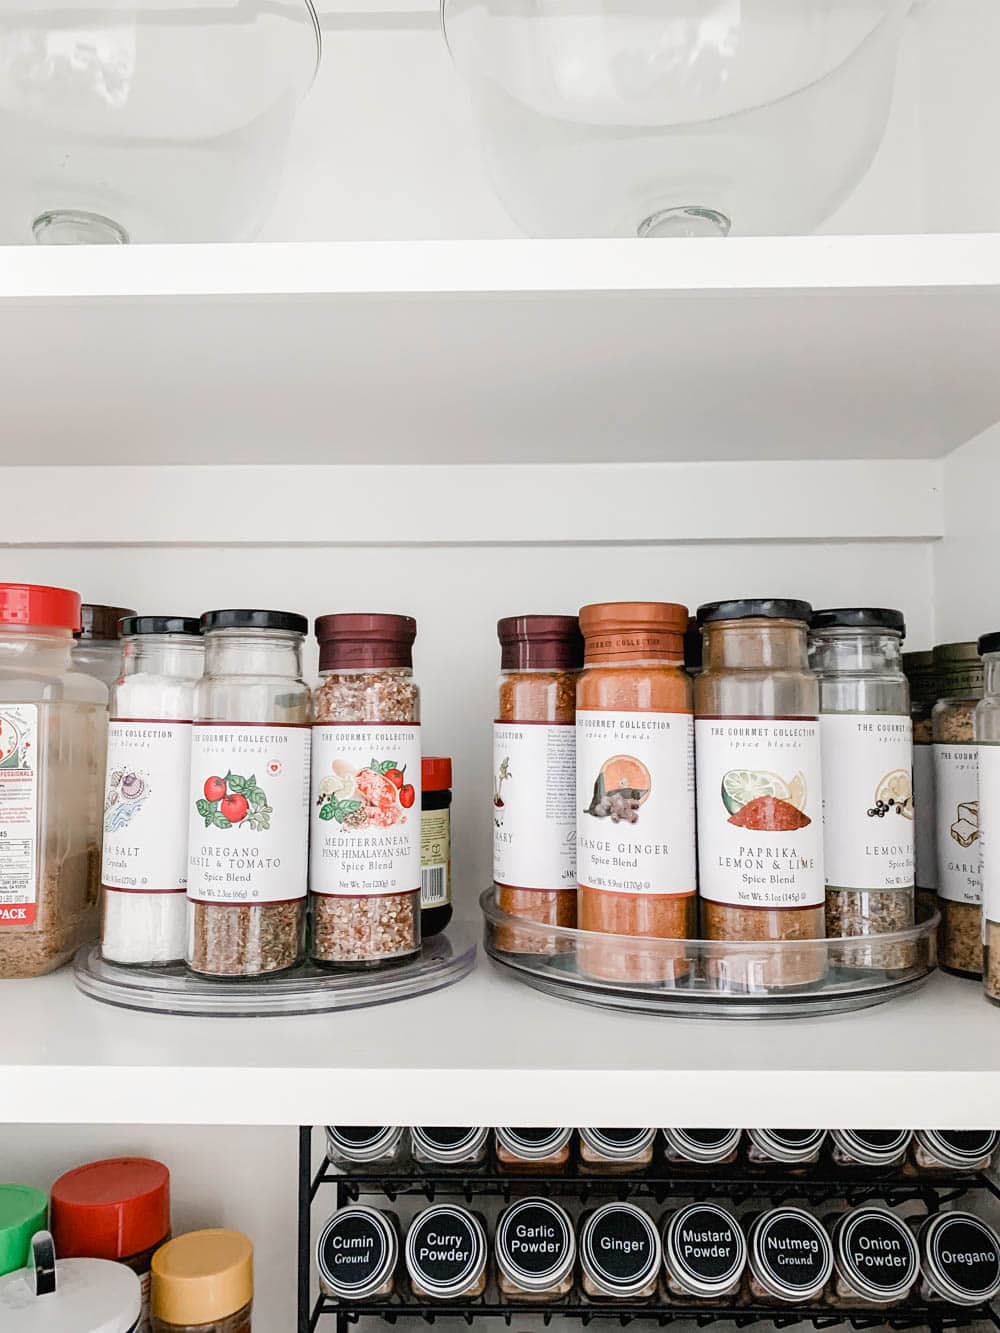 A before and after on how to purge a spice cabinet and the best organization products to use. #spicecabinet #kitchen #organization #ABlissfulNest